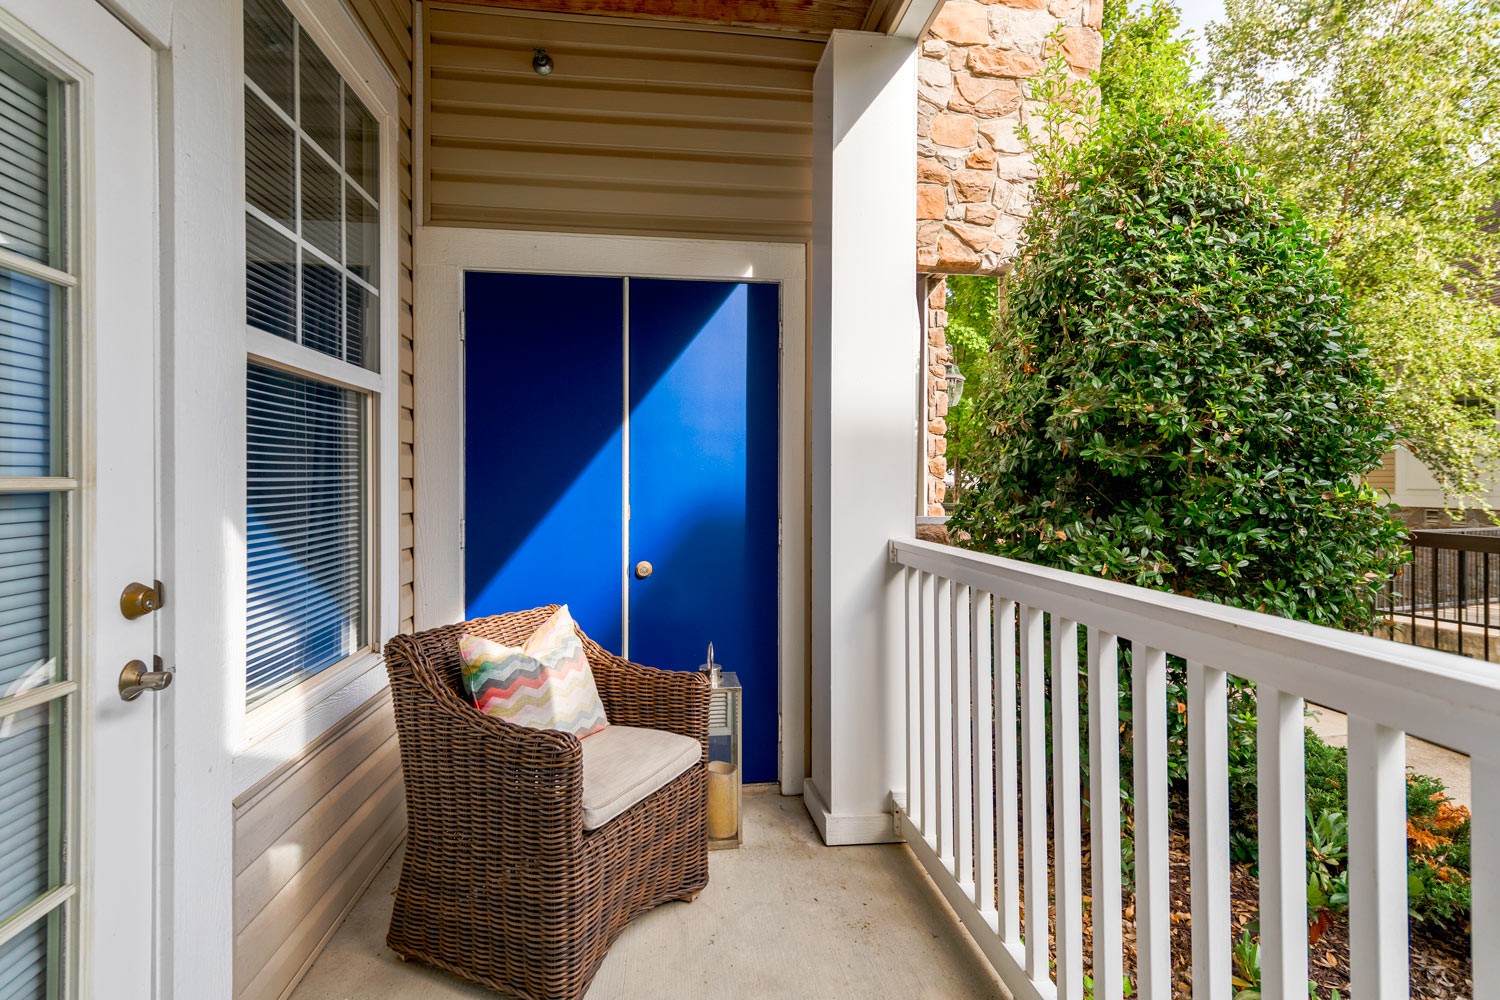 Stone Point Apartments : Spacious, private outdoor balconies provide you oasis